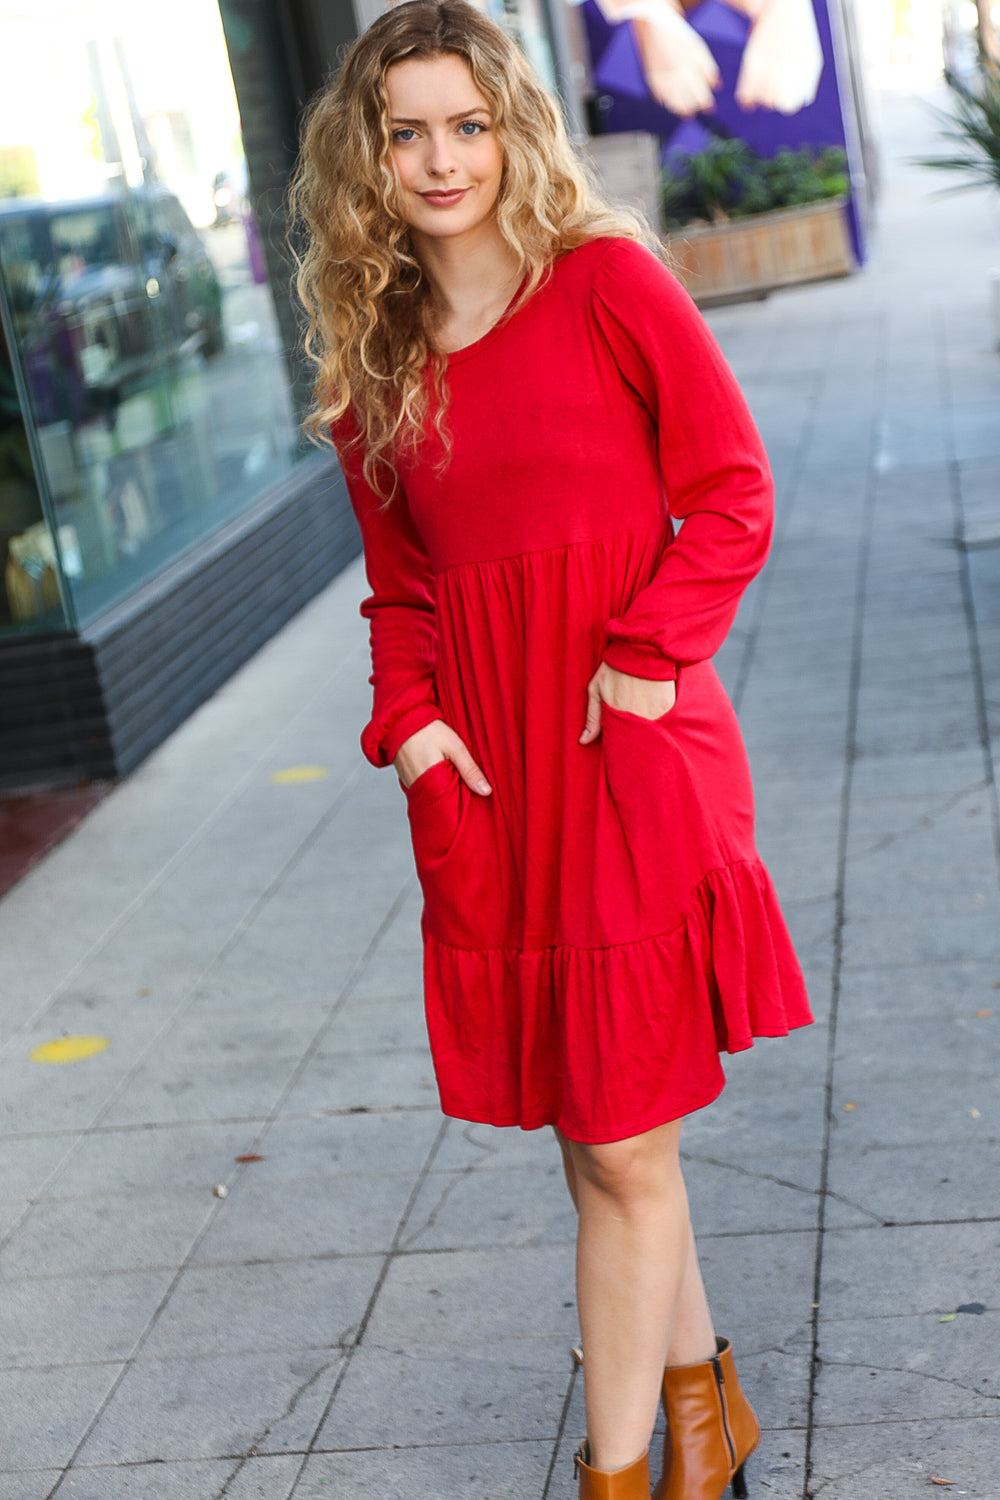 Lovely In Red - Fit & Flare Dress